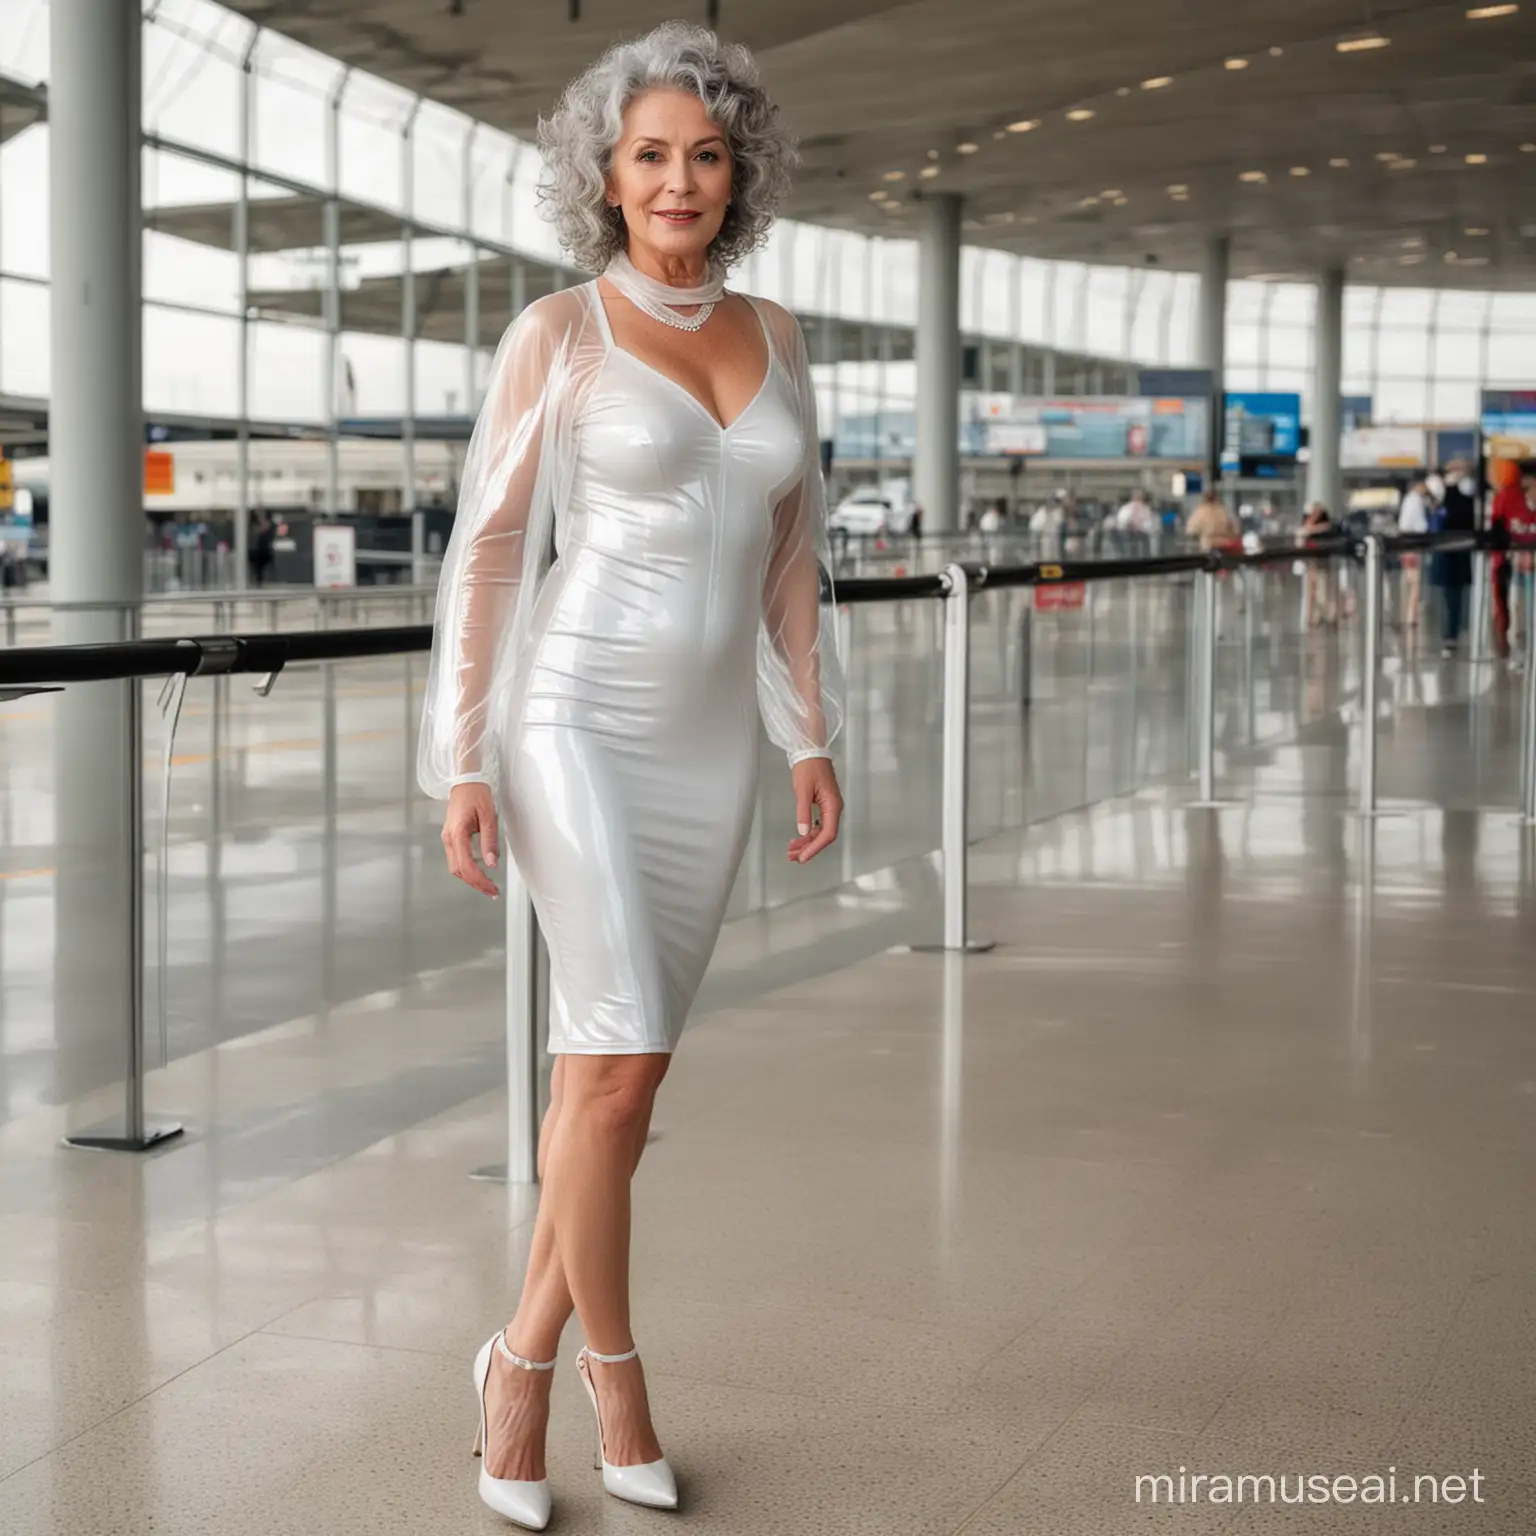 a full body view of a beautiful secuctive  very slimm 70 year old woman with grey curly hair wearing a tight transparent white colored open crotch latex dress  showing her bra and wearing high heels standing at an airport